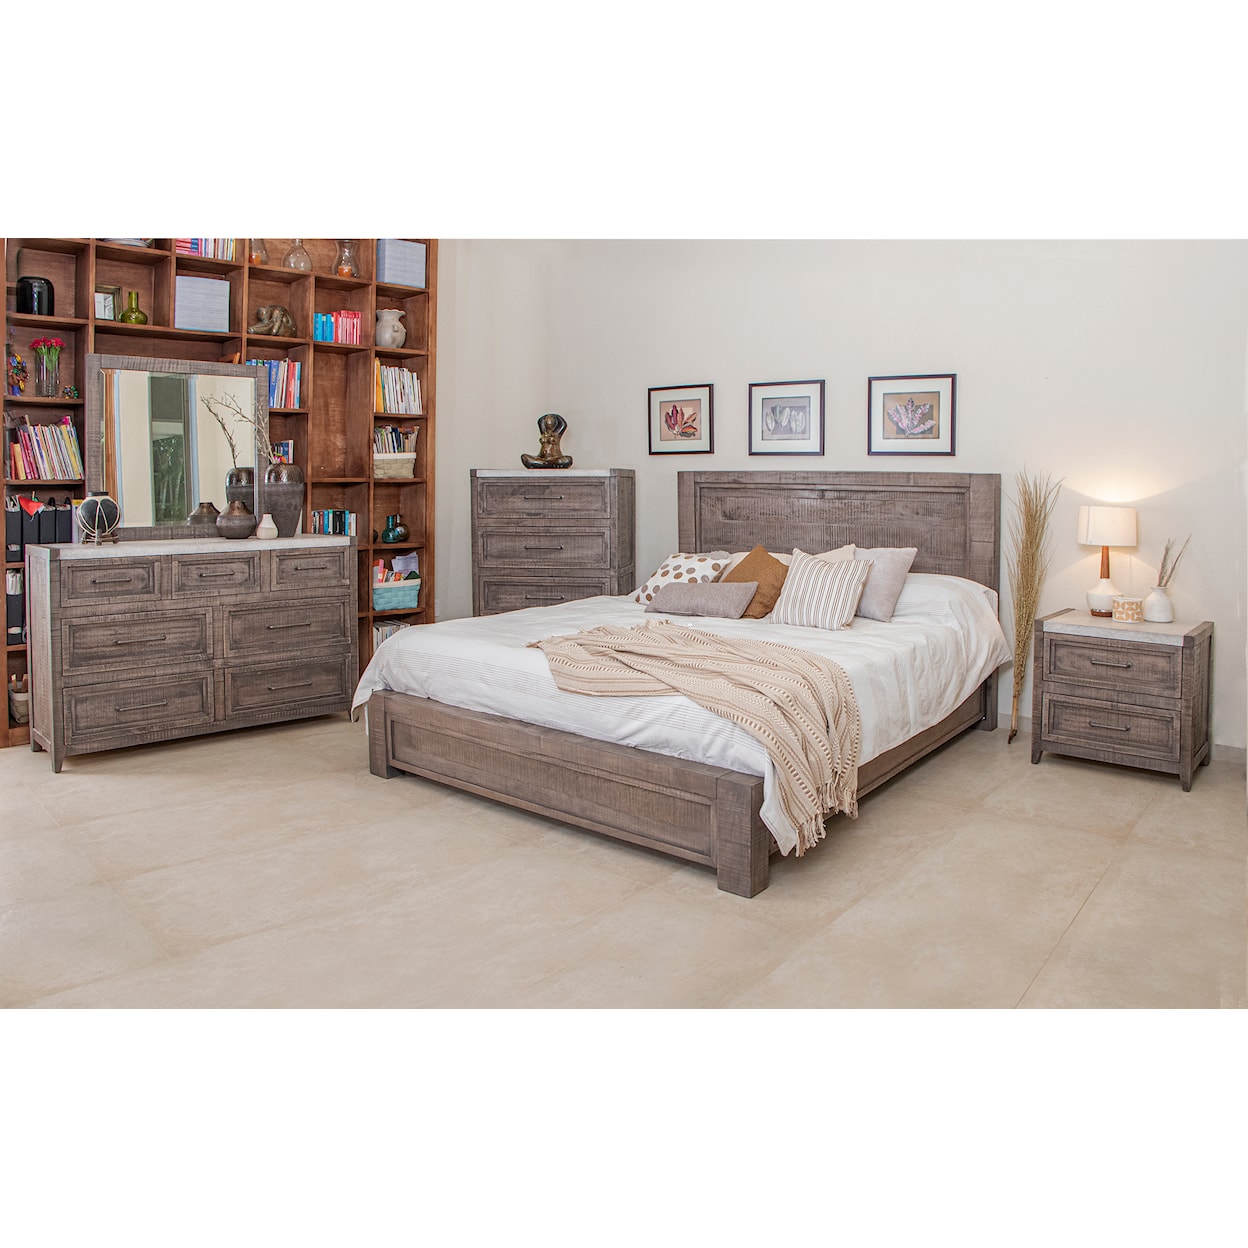 IFD International Furniture Direct Marble King Bed